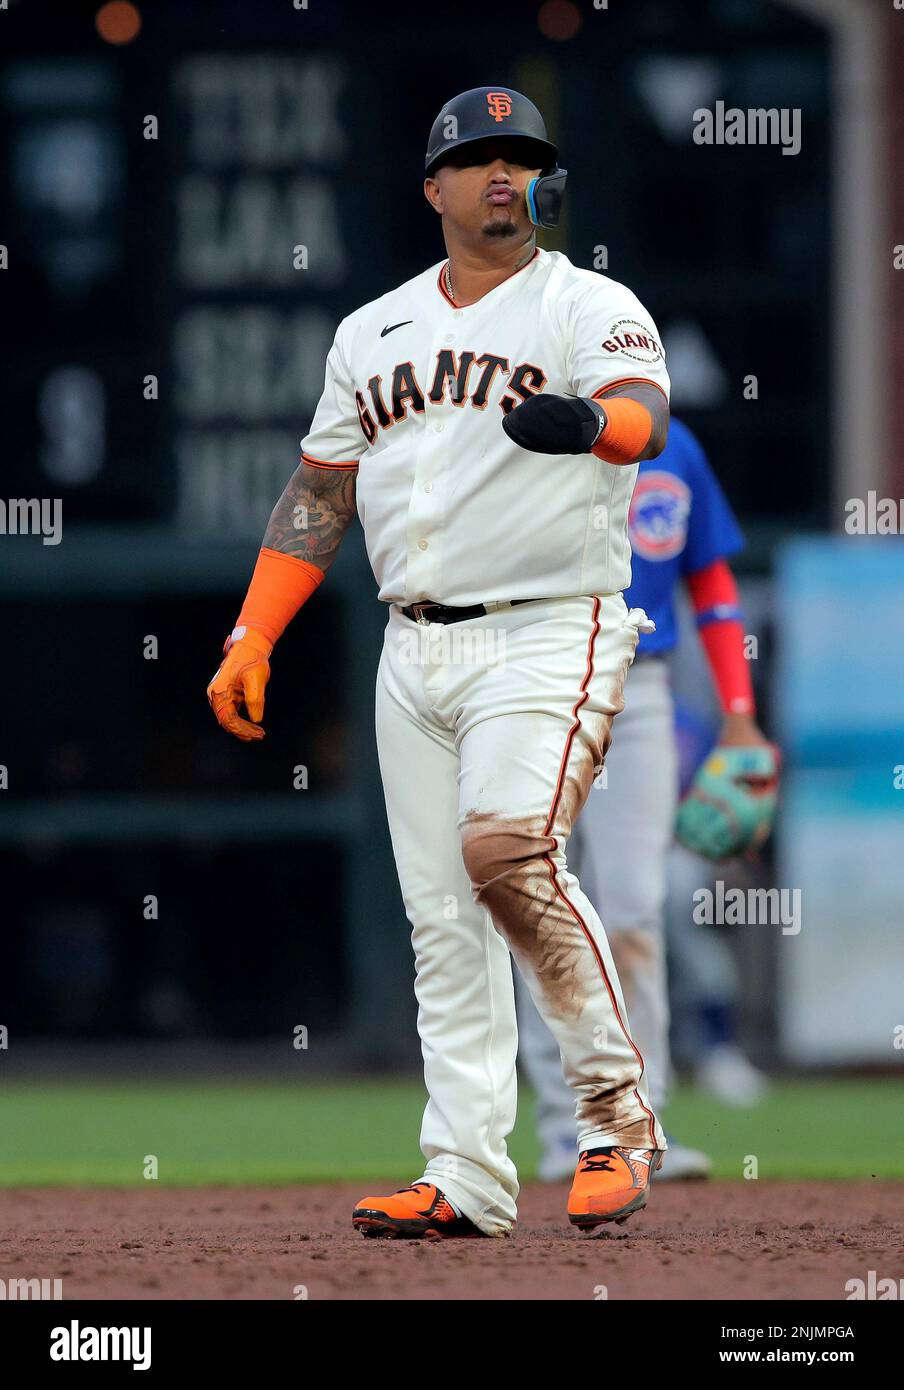 Yermin Mercedes (6) blows a kiss back to the dugout after reaching second  on a ball hit by Thairo Estrada (39) in the third inning as the San  Francisco Giants played the